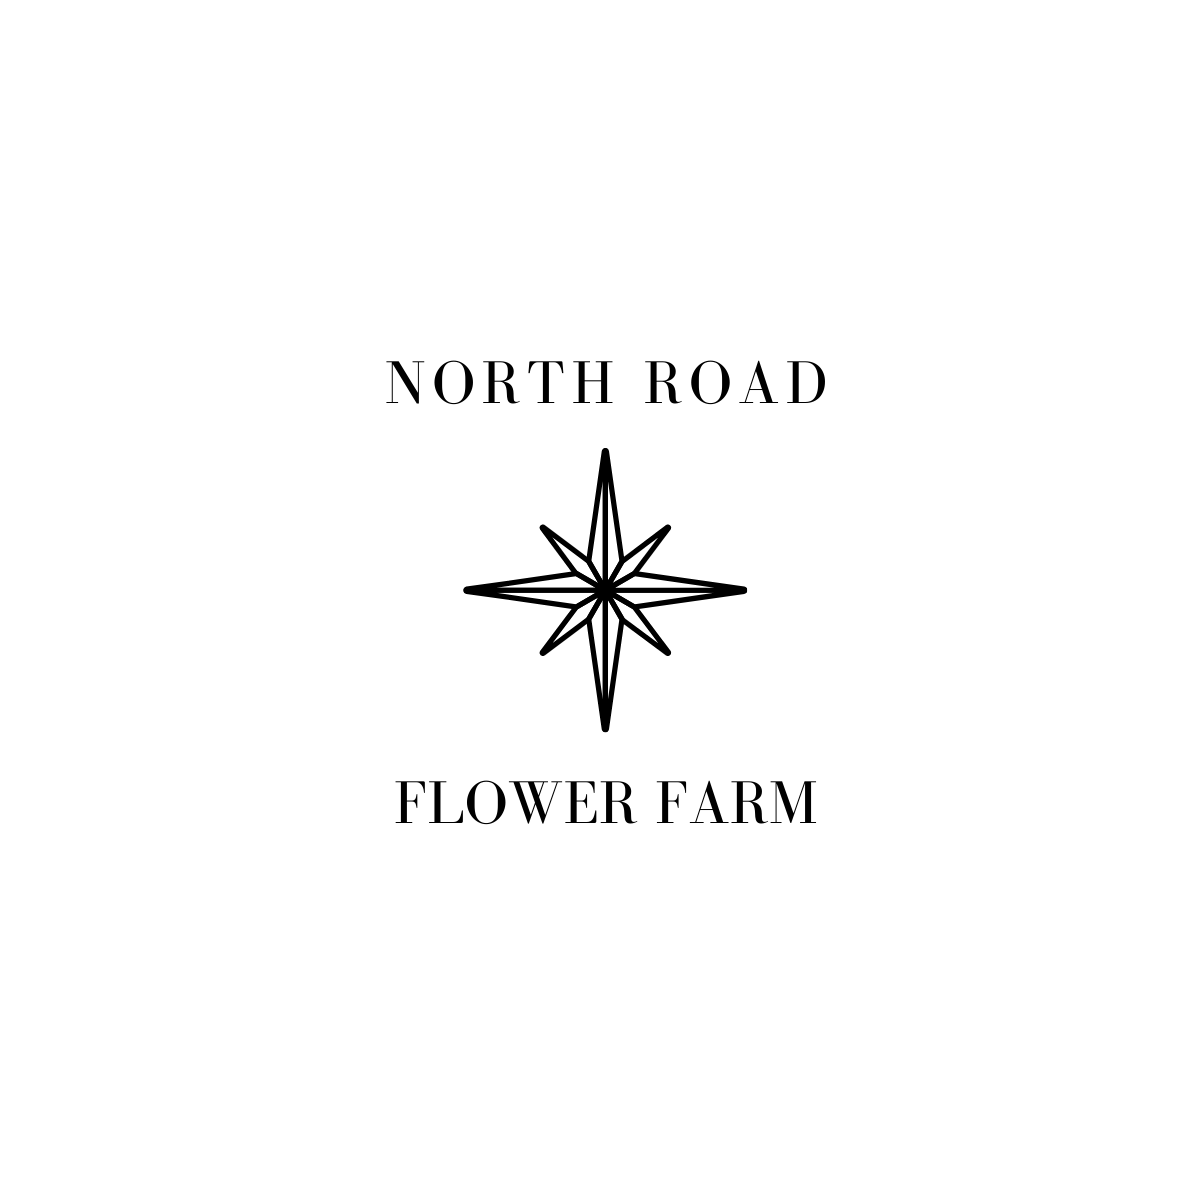 Where to find our flowers | North Road Flower Farm - Wisconsin